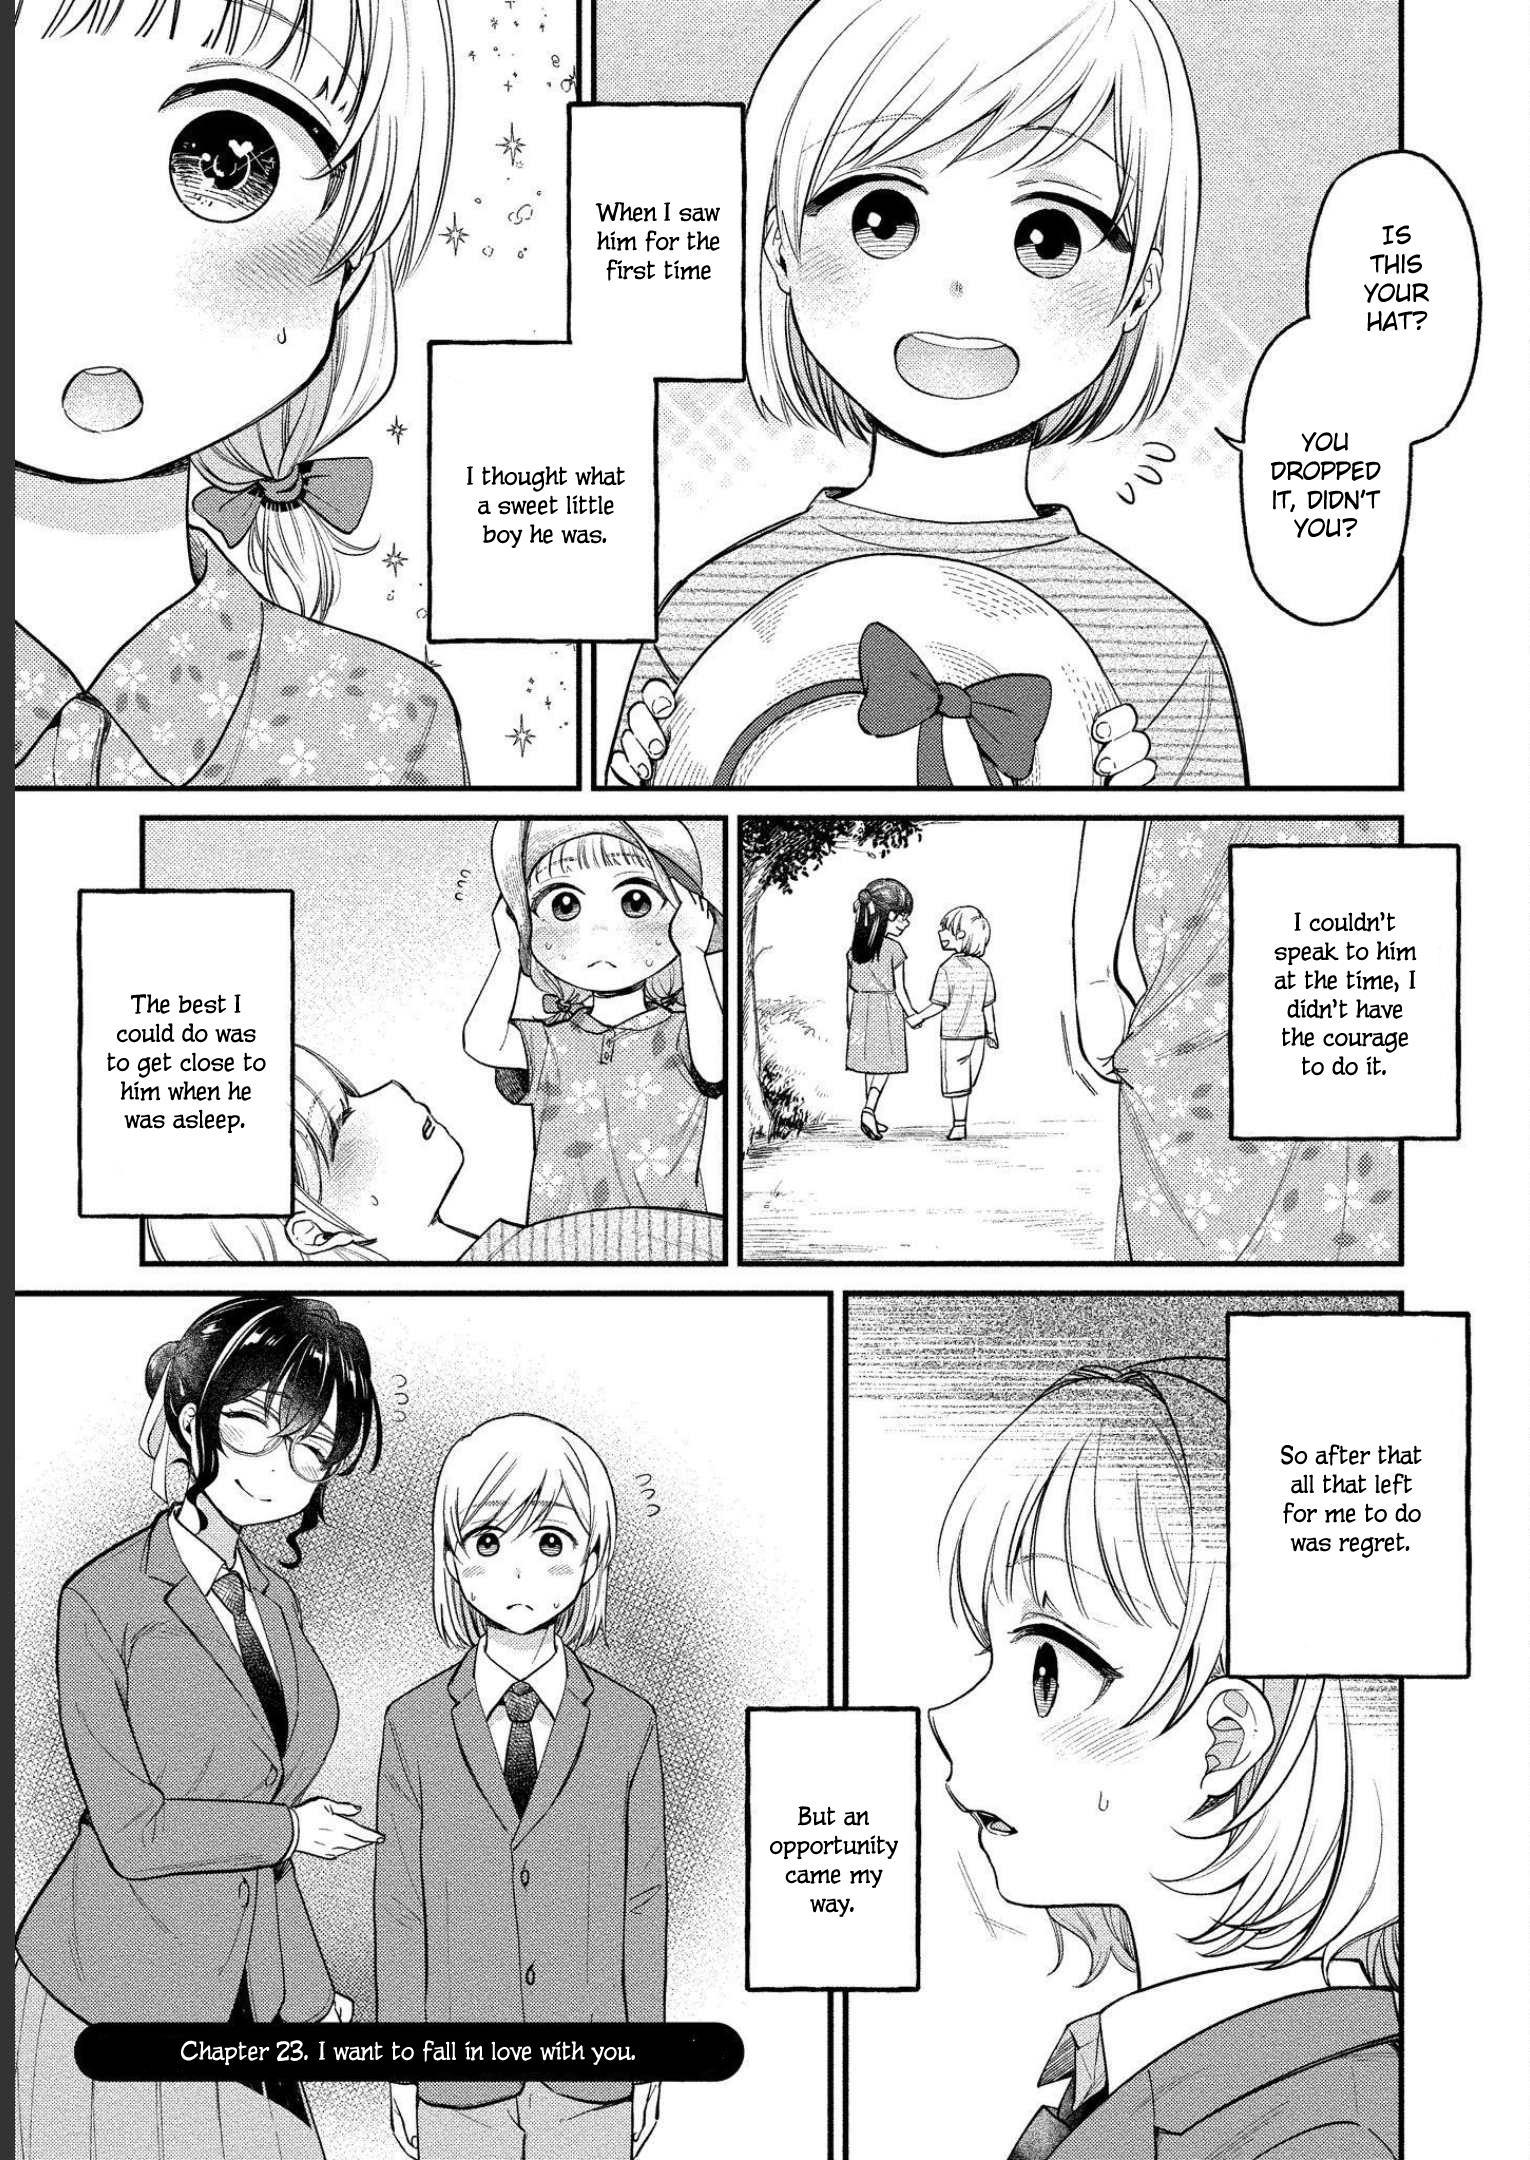 Yuki Nee-Chan No Kan-Nou Gokko Vol.4 Chapter 23: I Want To Fall In Love With You - Picture 2